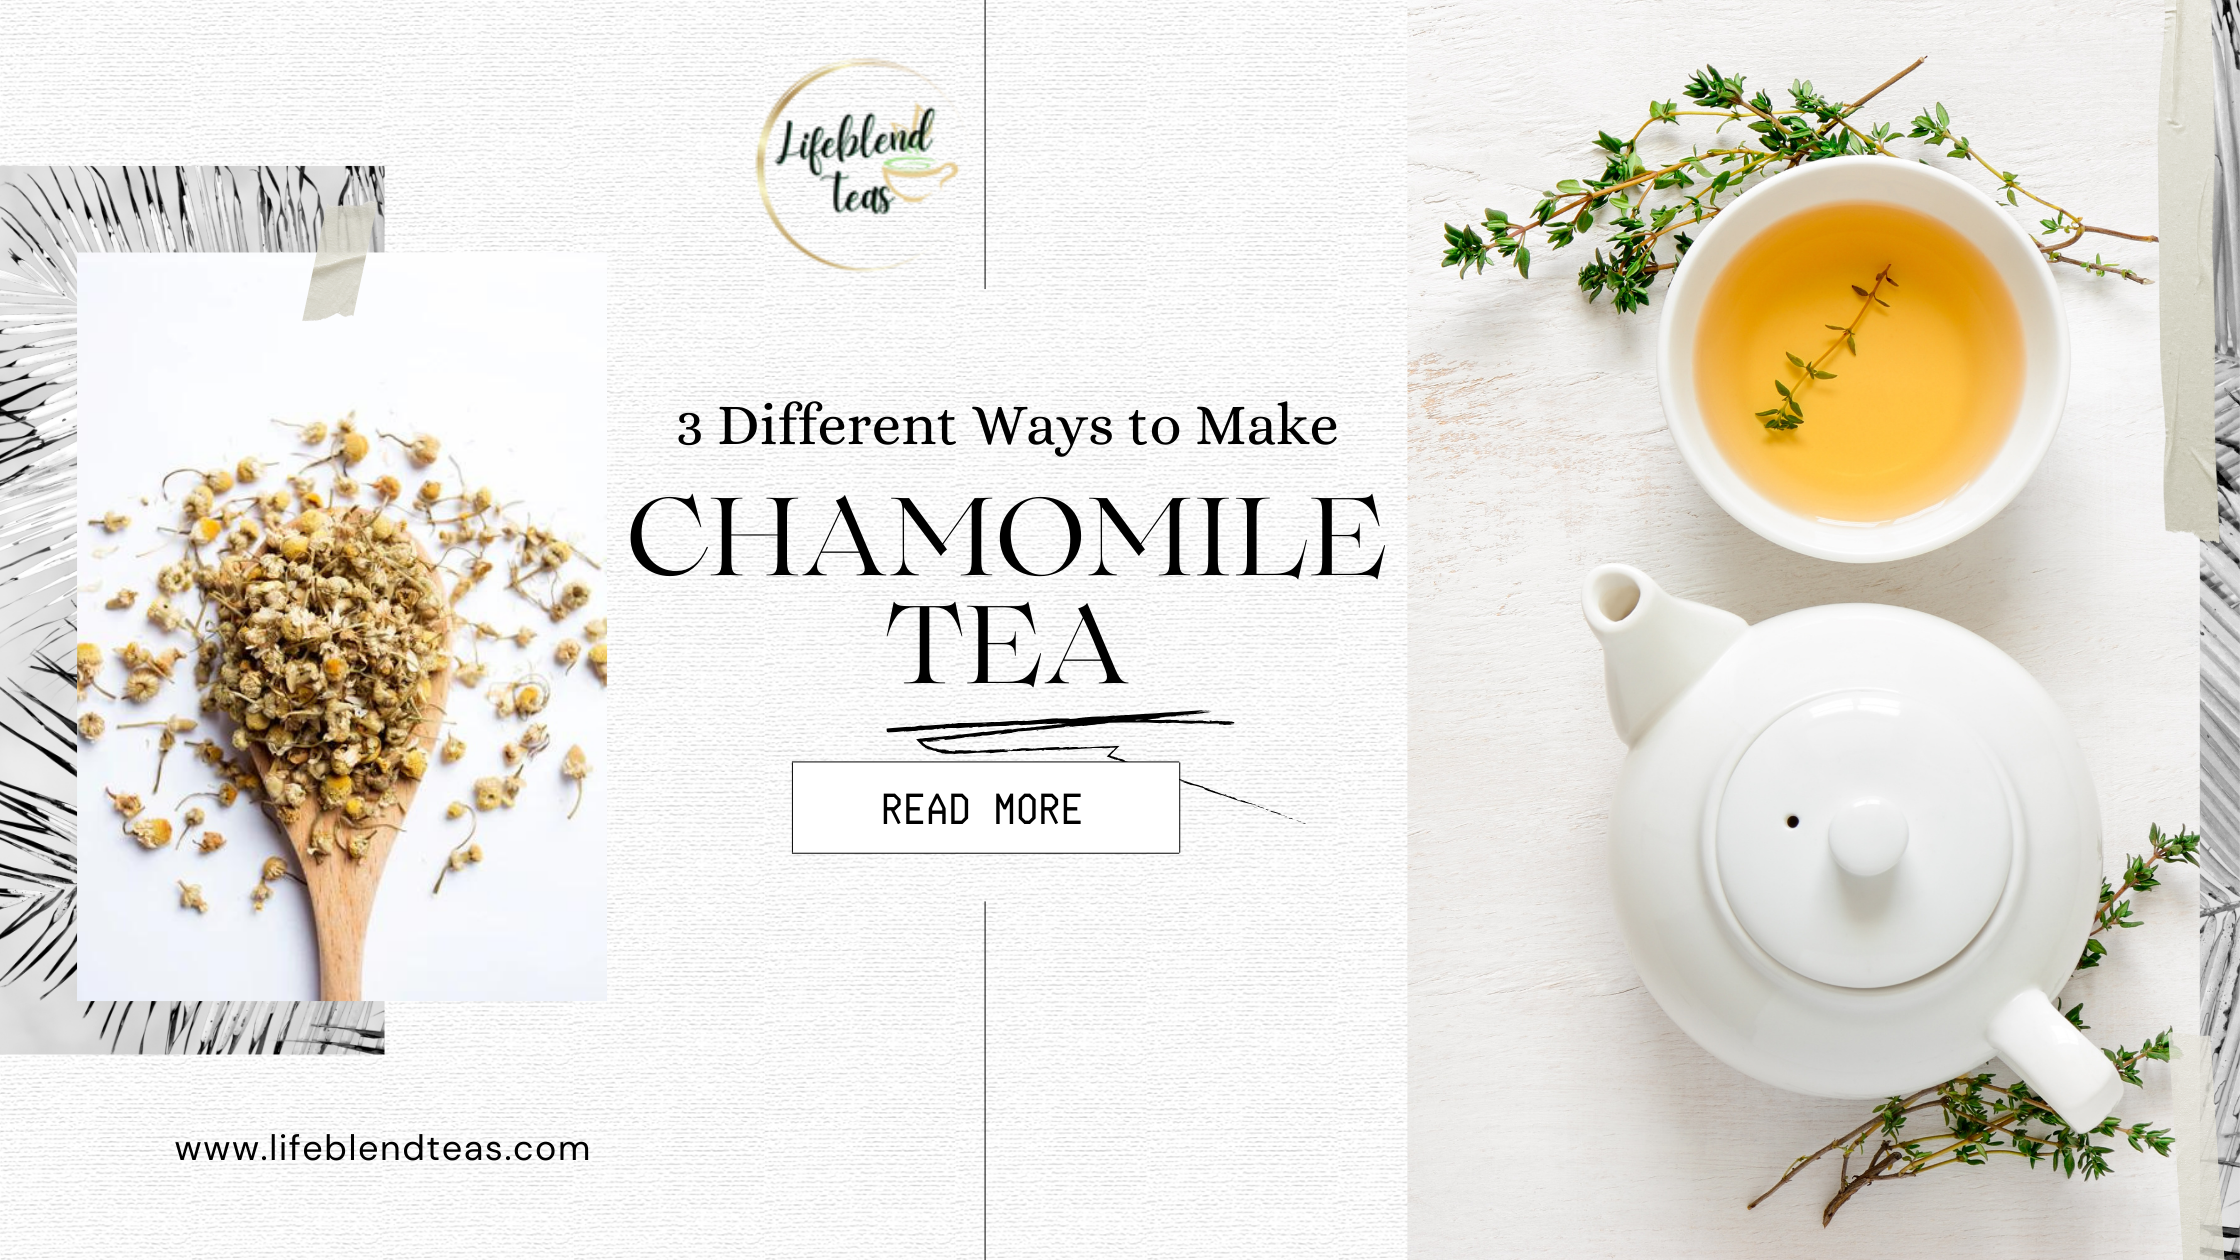 3 Different Ways to Make Chamomile Tea from Lifeblend Teas